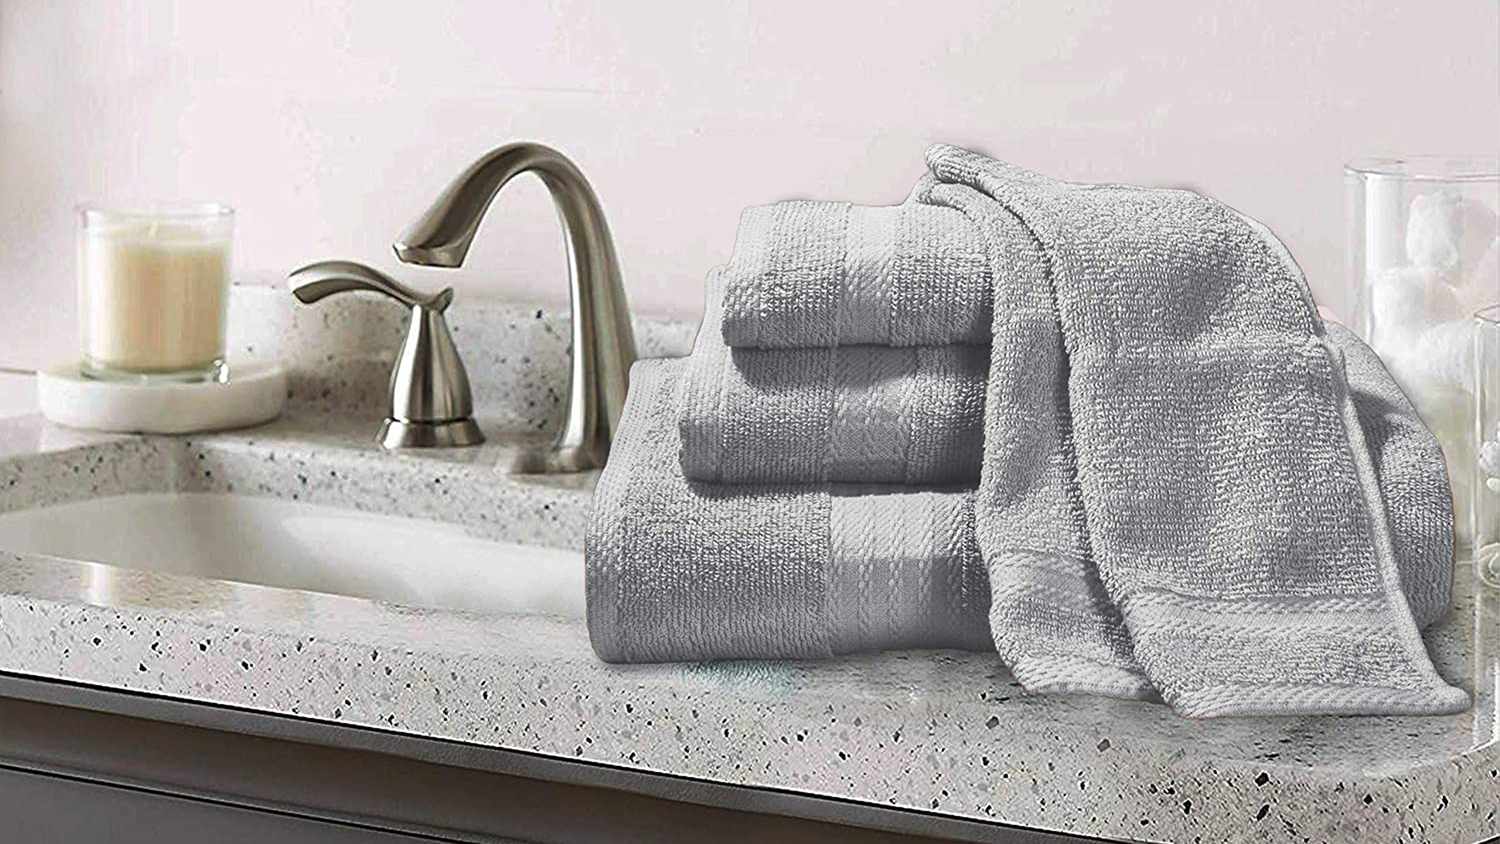 Navy Blue Glamburg Premium Cotton 4 Pack Bath Towel Set Ultra Soft & Highly Absorbent Ideal for Everyday use 100% Pure Cotton 4 Bath Towels 27x54